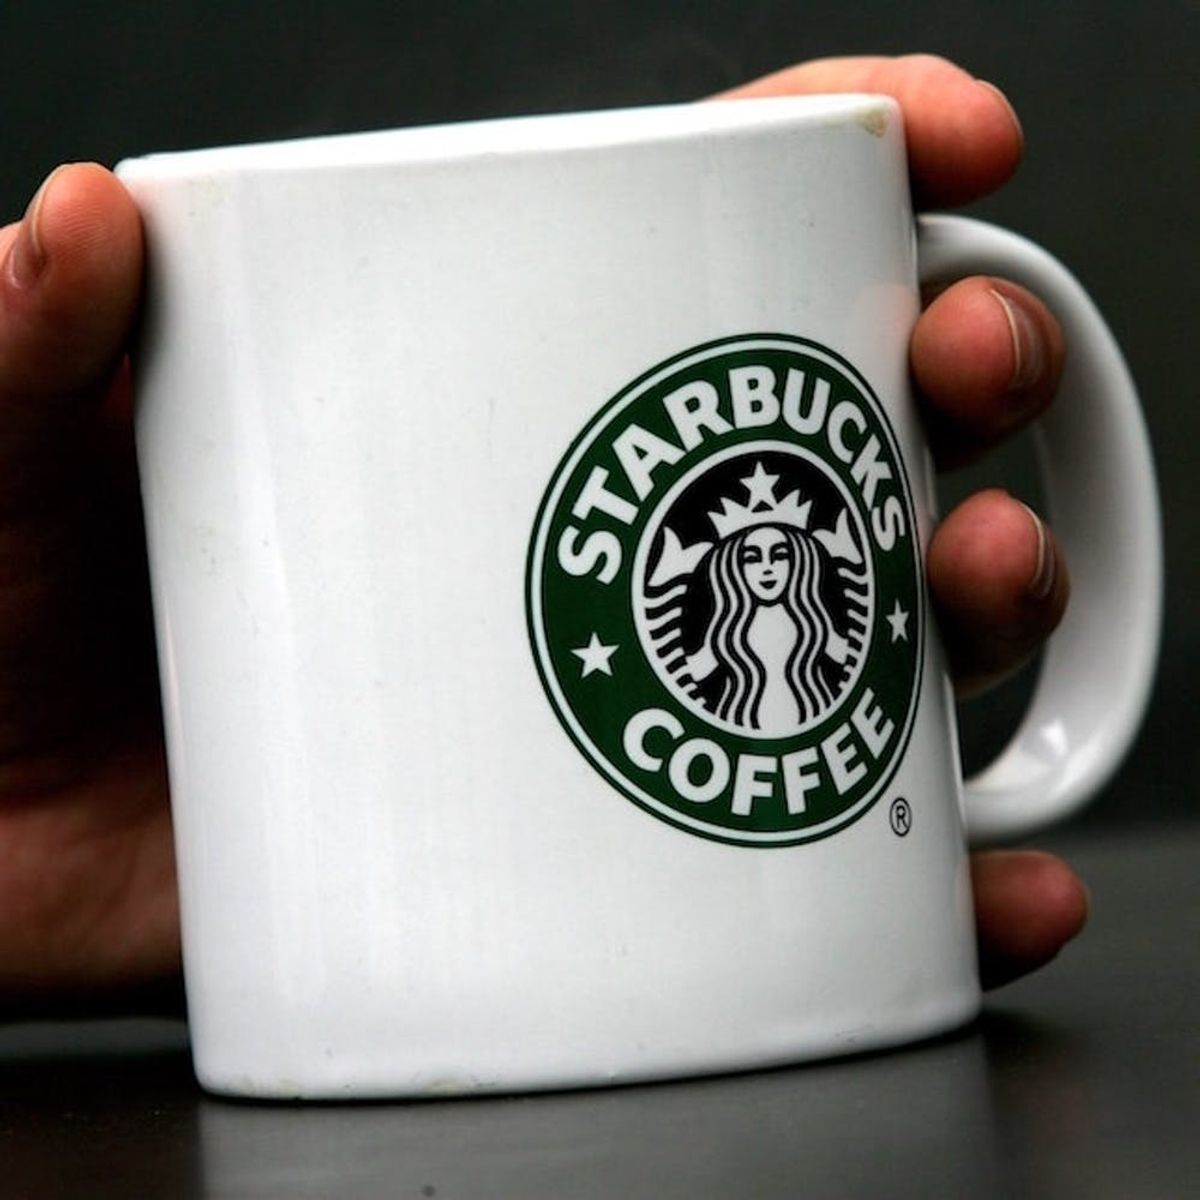 These Starbucks Secrets Revealed by a Former Employee Might Surprise You